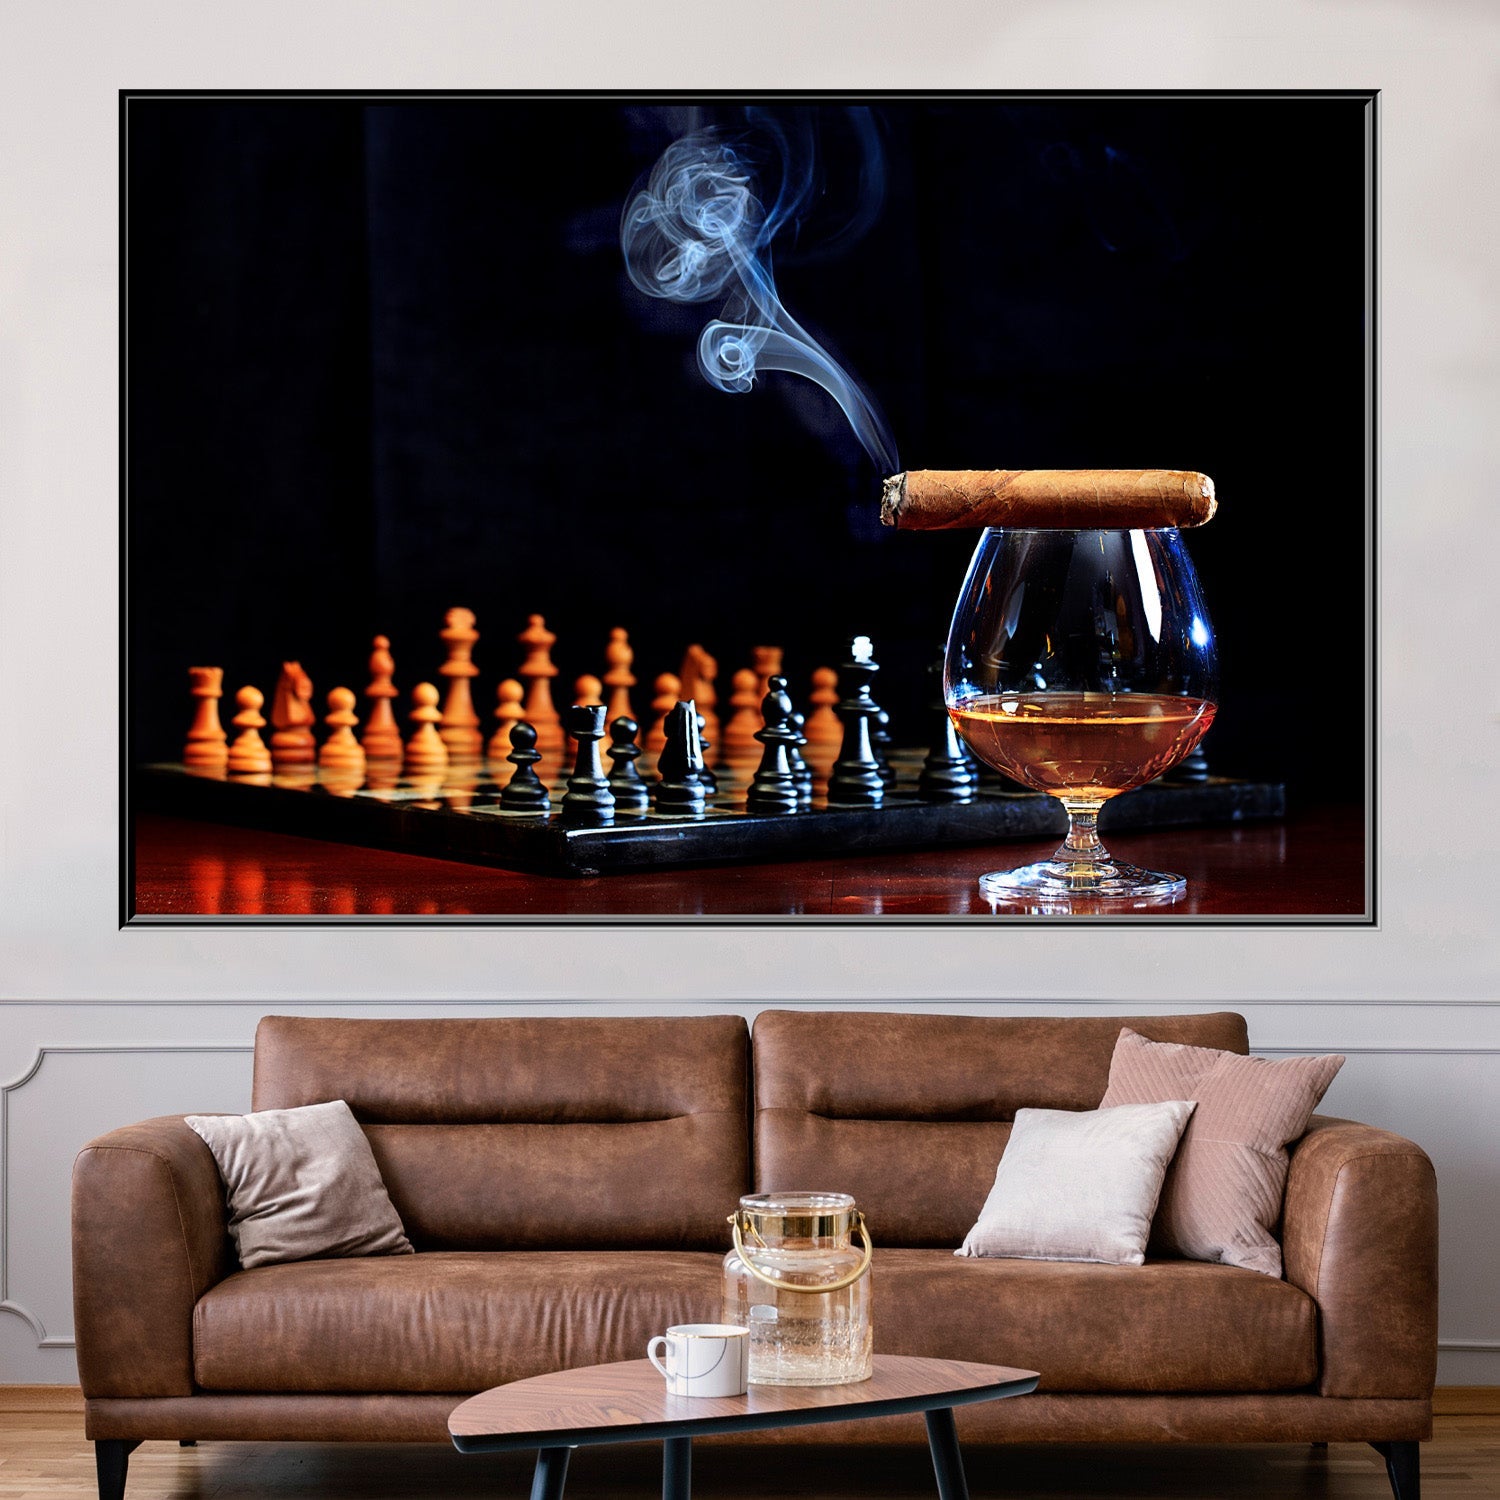 https://cdn.shopify.com/s/files/1/0387/9986/8044/products/ChessScotchandCigarCanvasArtprintStretched-2.jpg